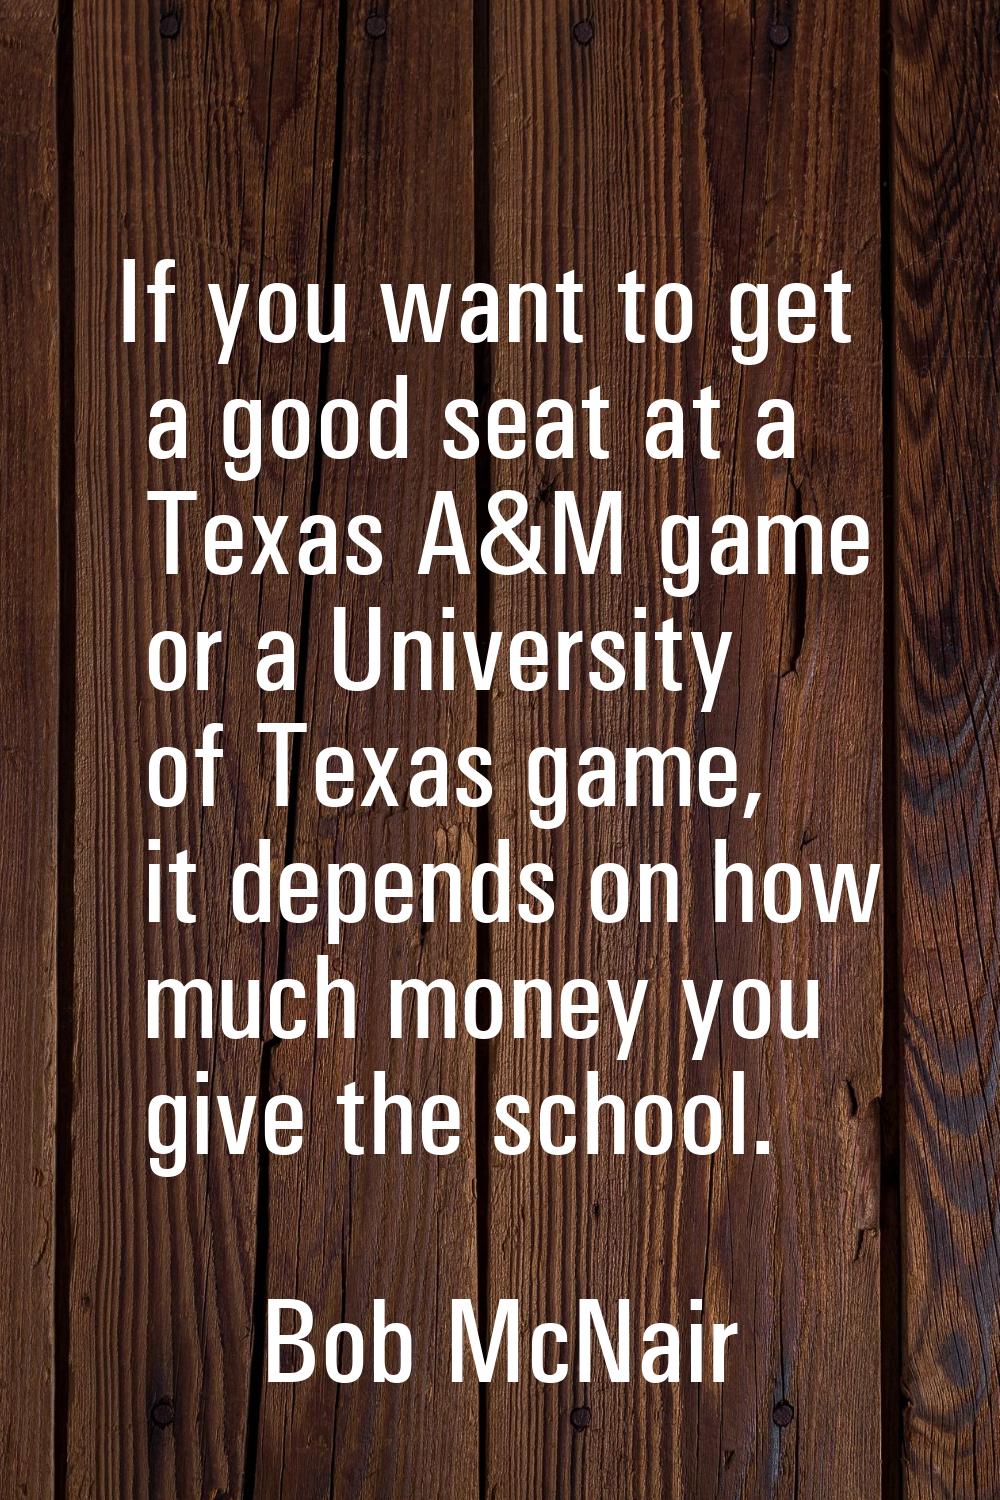 If you want to get a good seat at a Texas A&M game or a University of Texas game, it depends on how